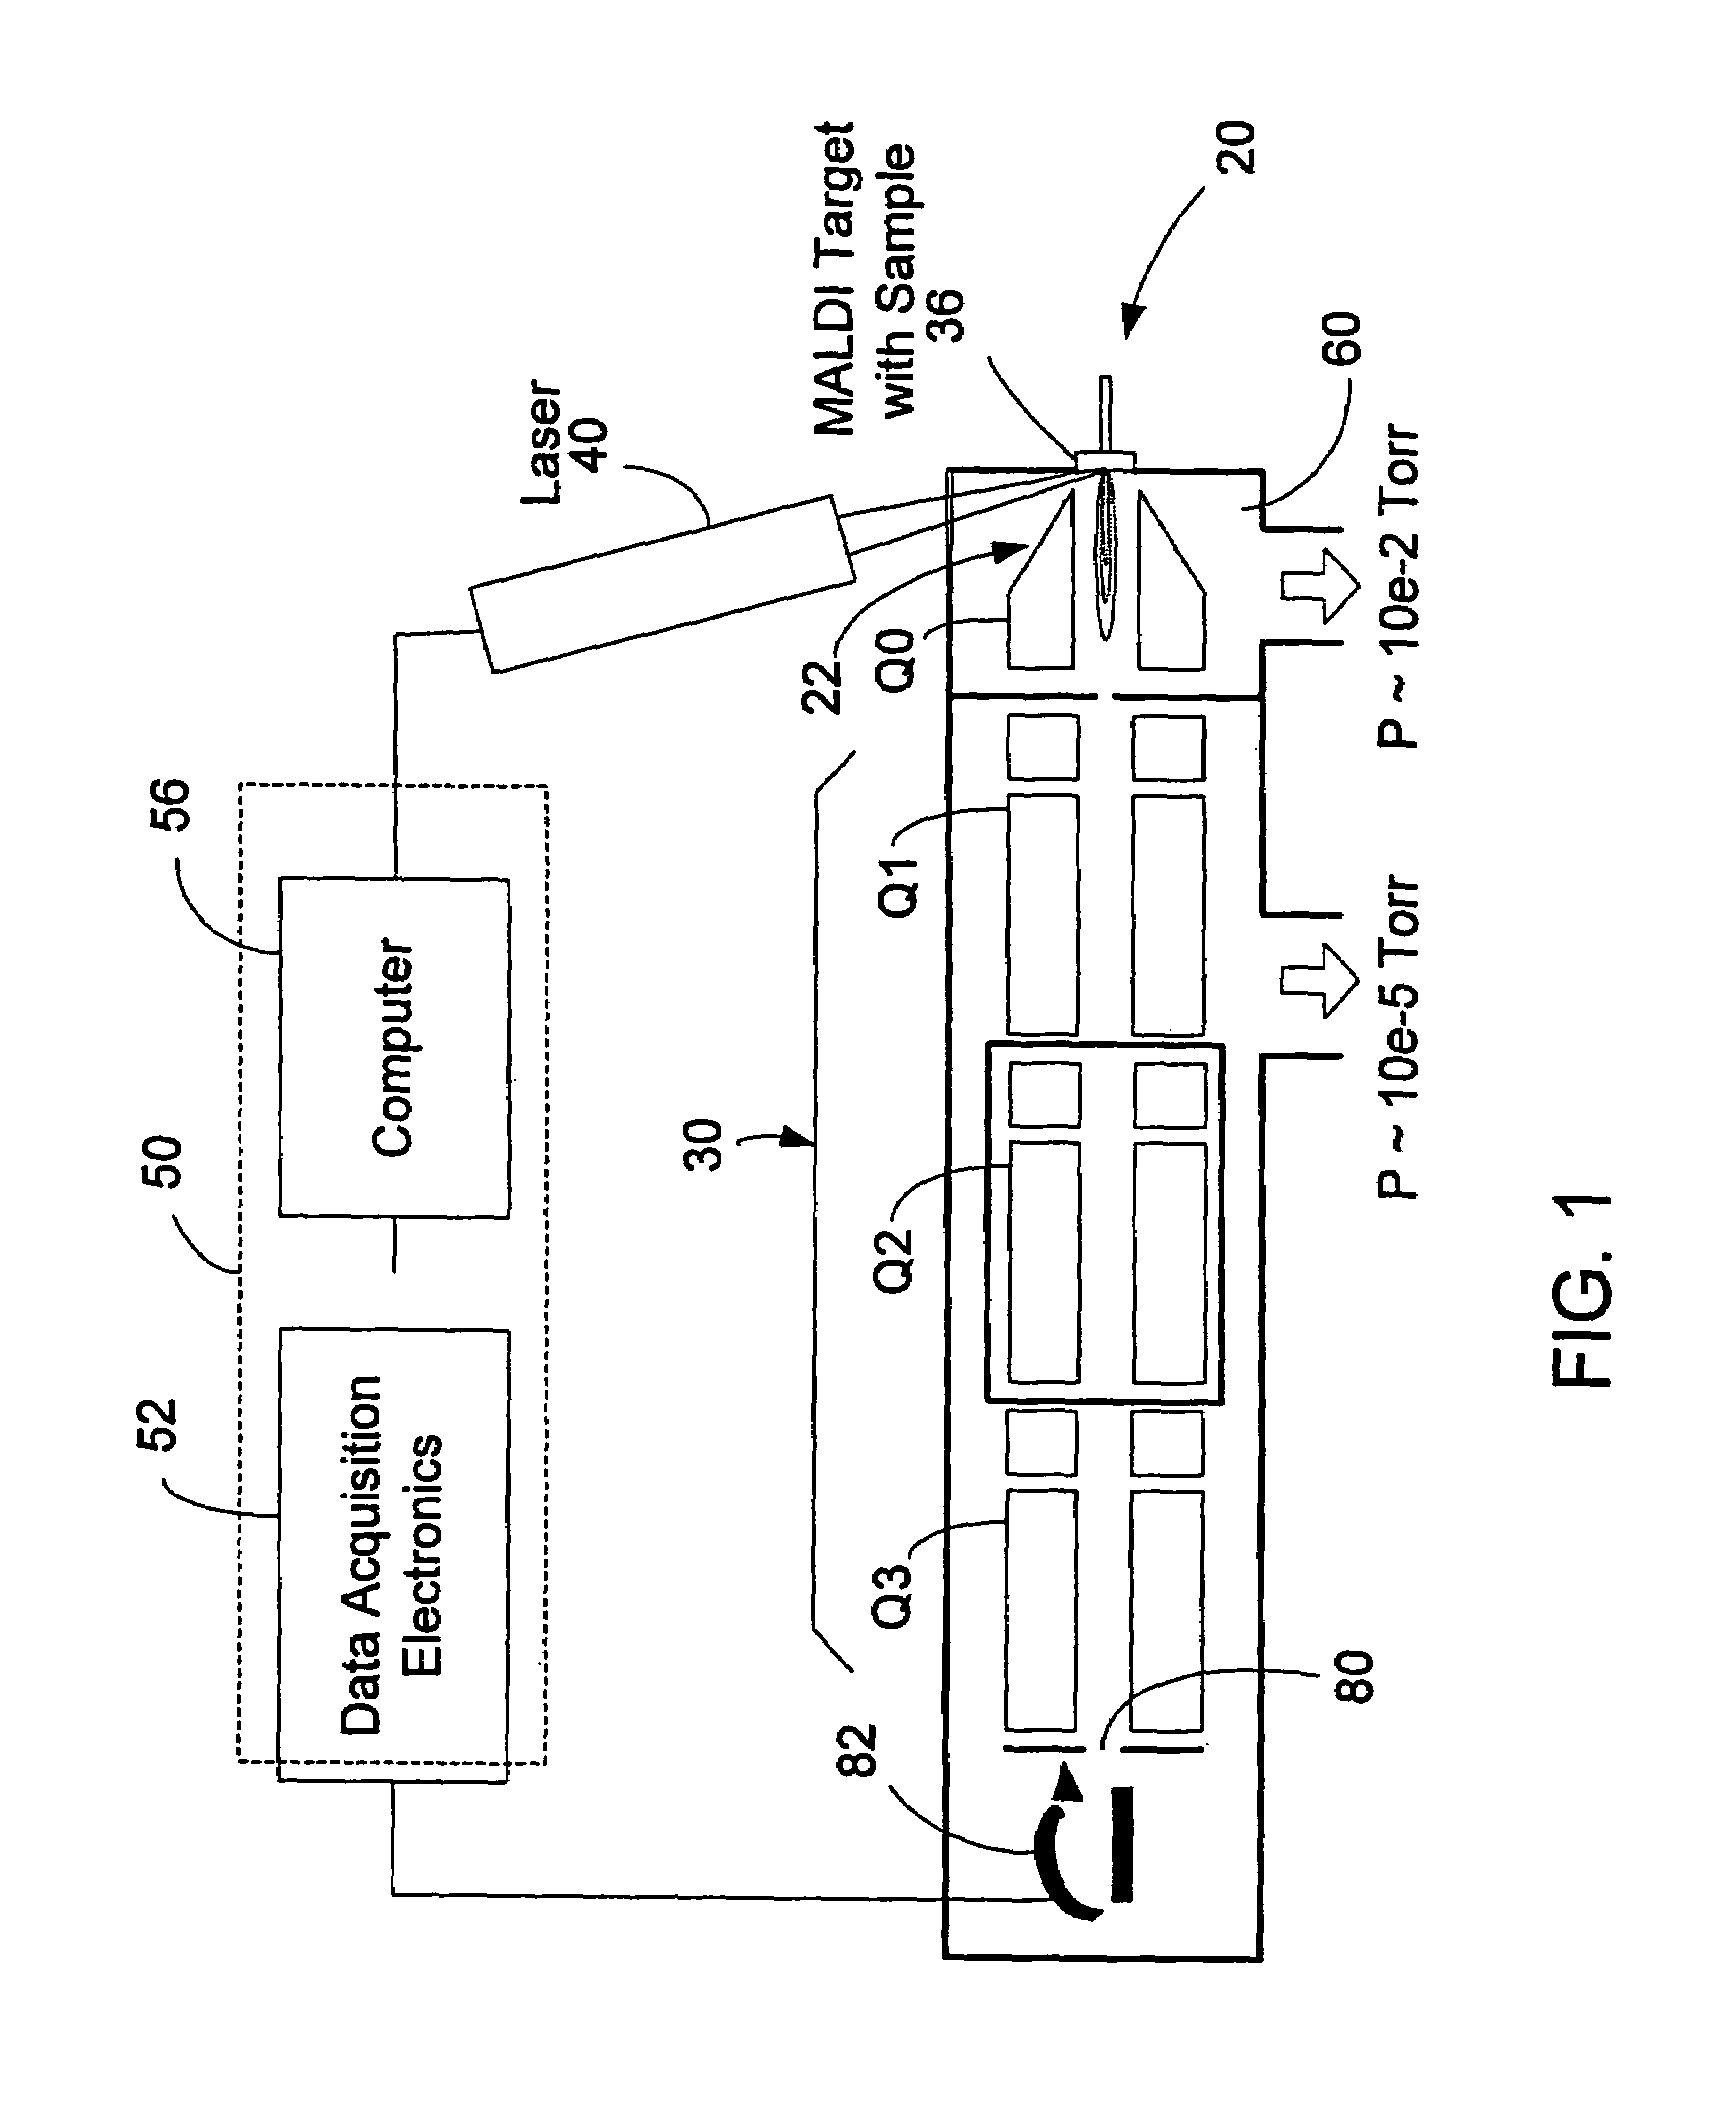 Method and system for high-throughput quantitation using laser desorption and multiple-reaction-monitoring